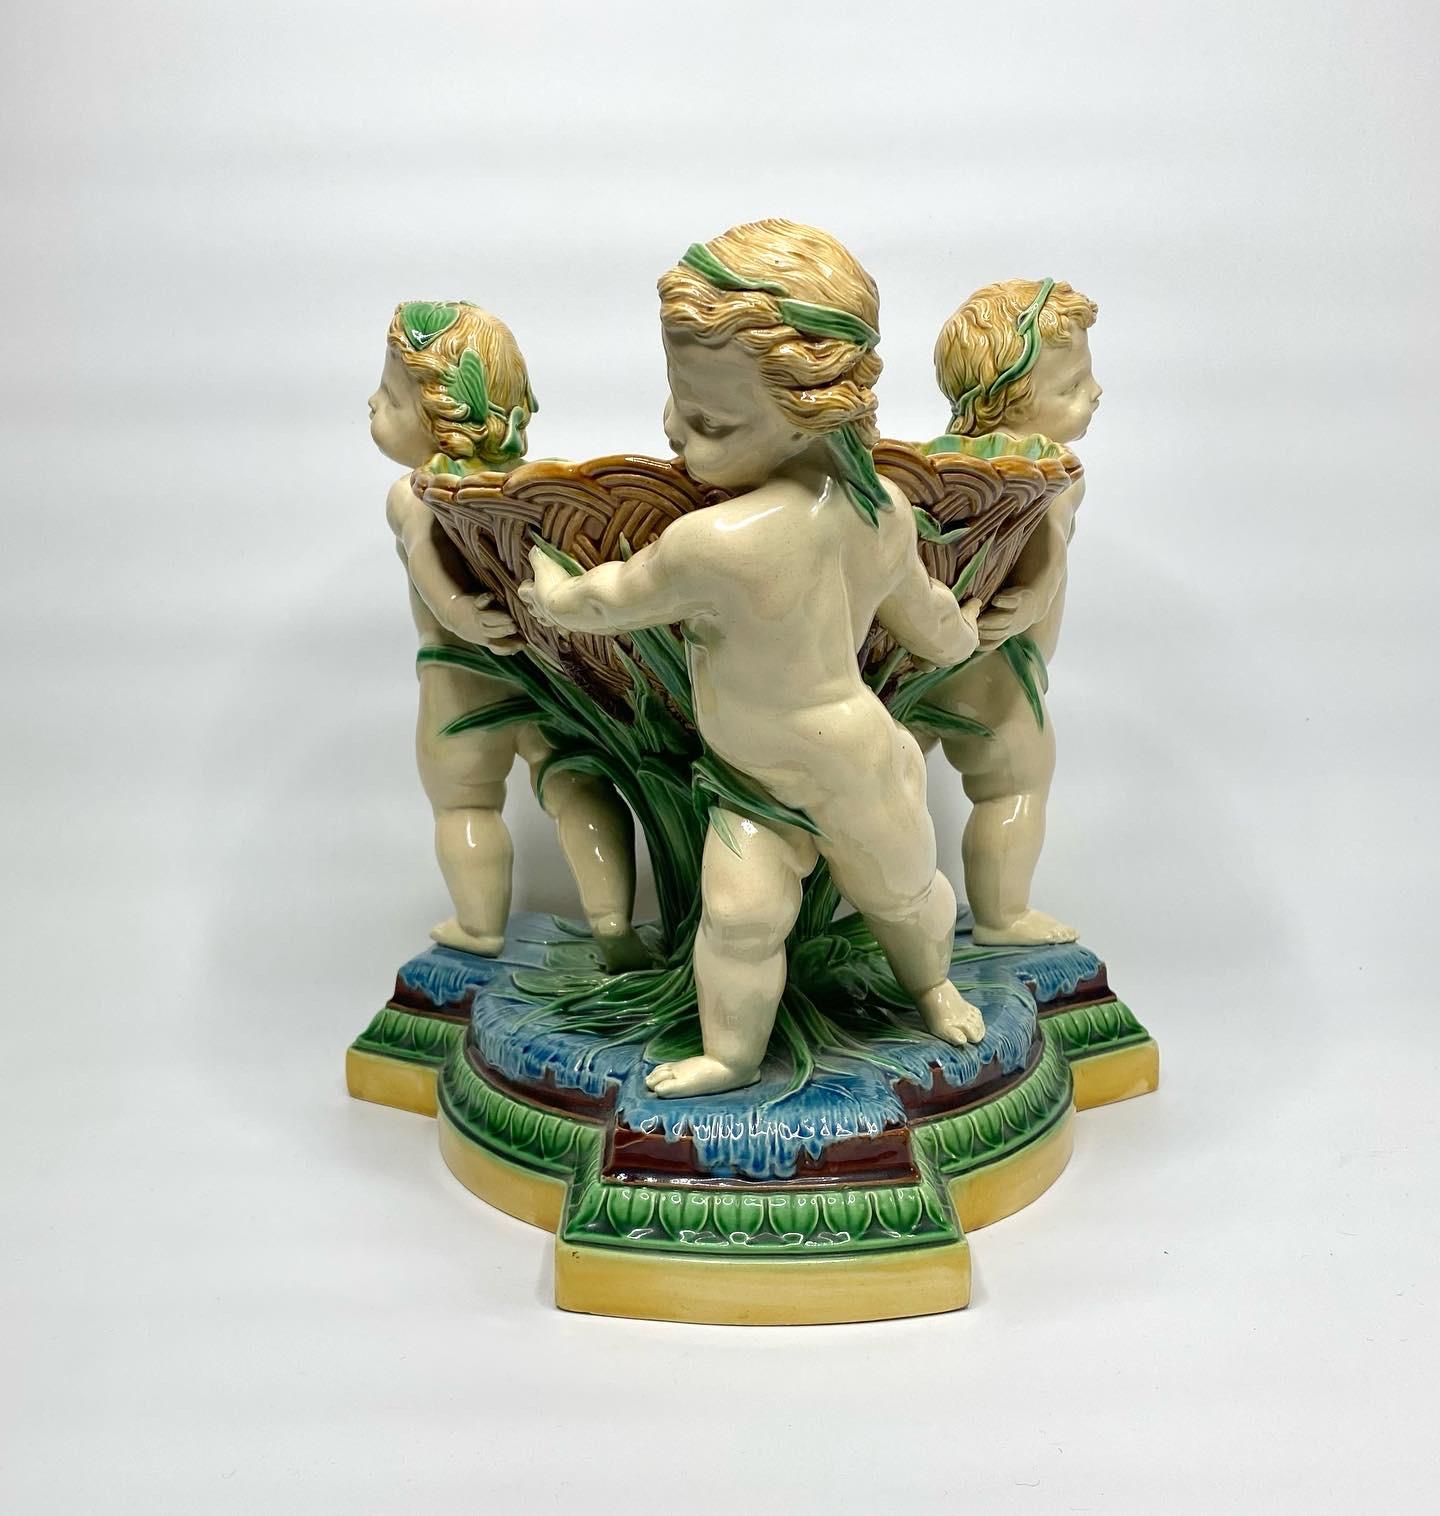 An exceptionally fine and large Minton Majolica basket, dated 1863. Modelled as three cherubs, with lily pad garlands in their hair, as they slide across a river. They carry a large weave moulded basket, supported by bulrushes, and lily pads.
The